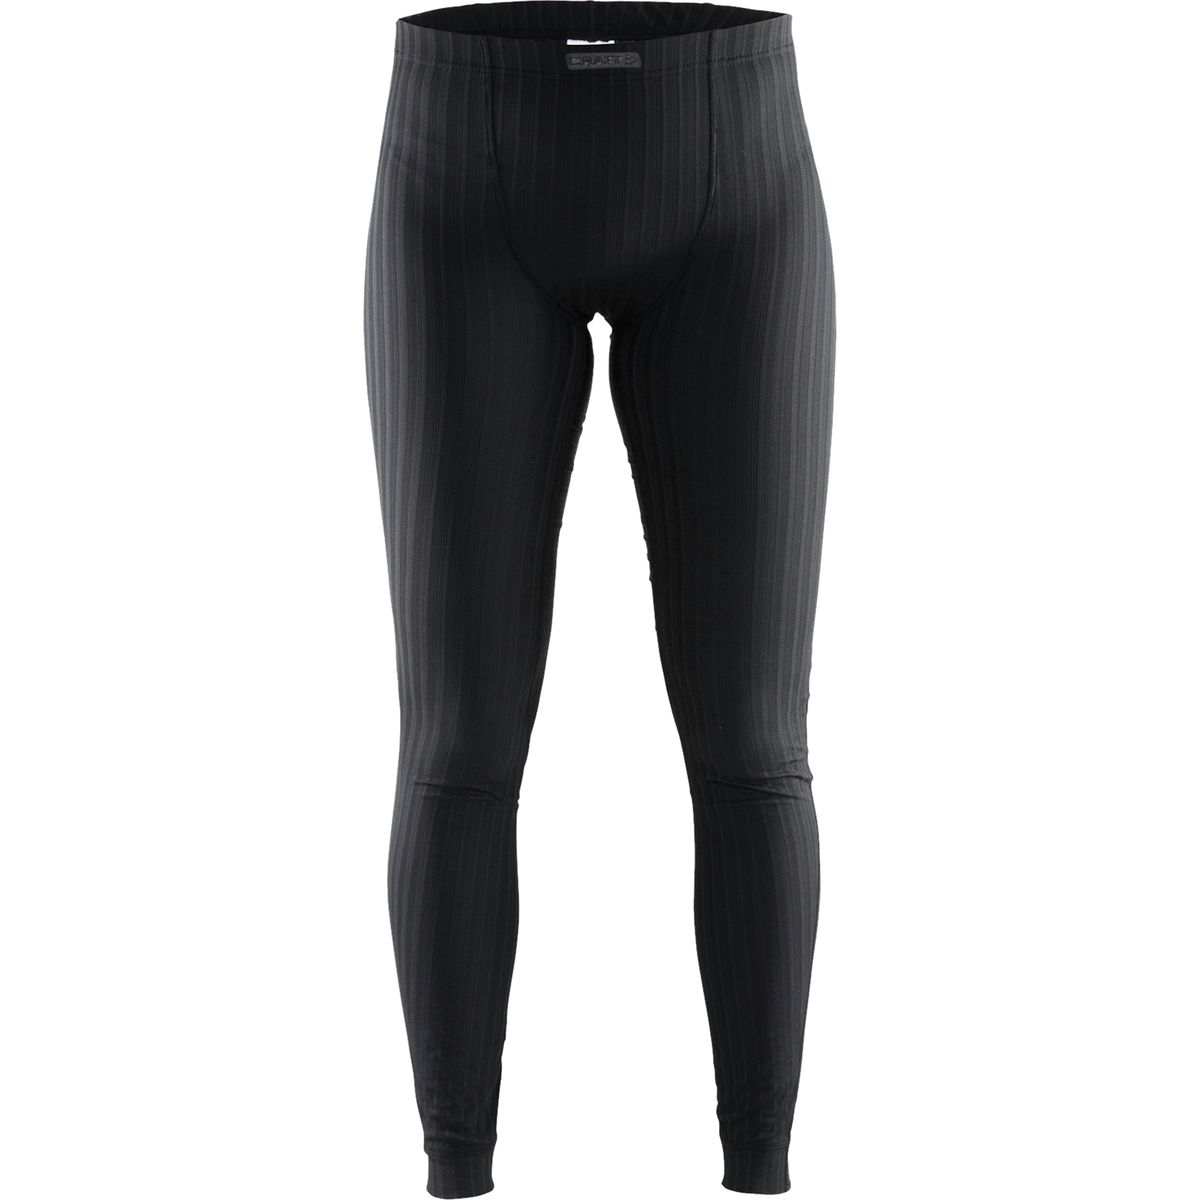 Craft Active Extreme 2.0 Pant - Women's